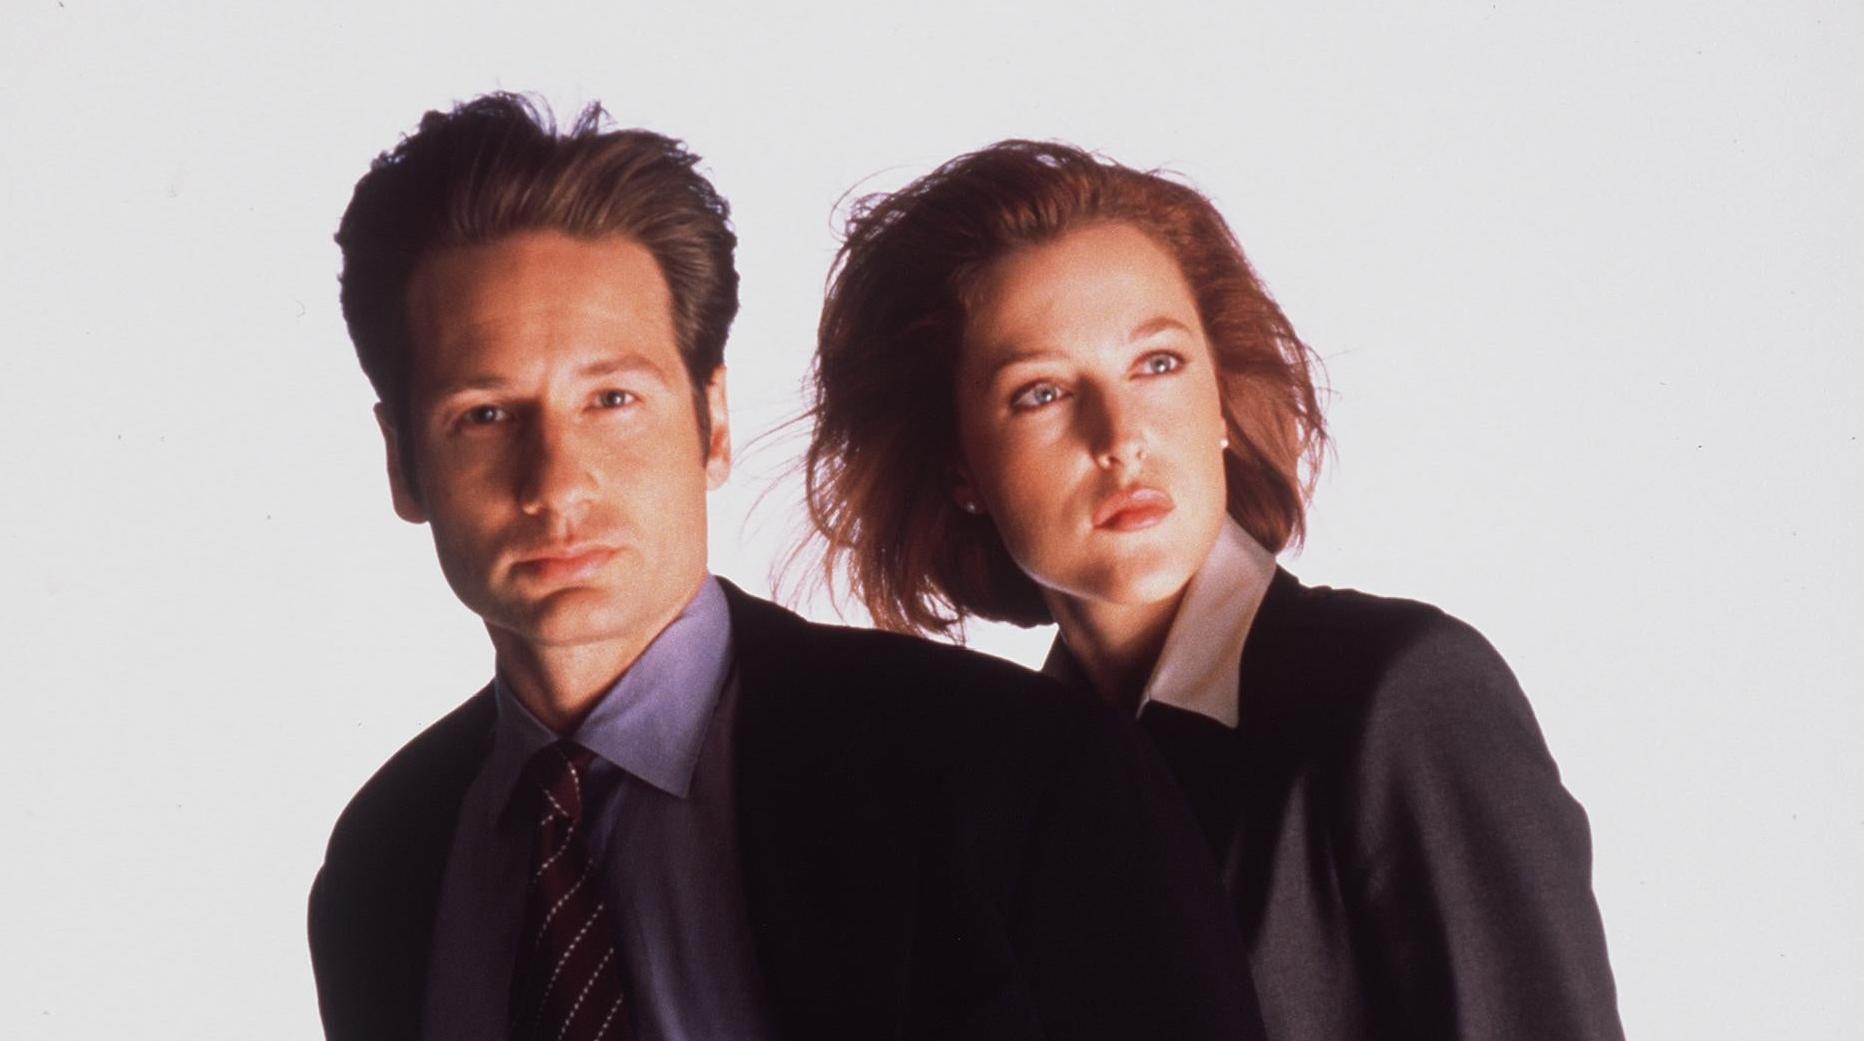 After inconclusive government UFO report, The X-Files creator Chris Carter still Wants To Believe